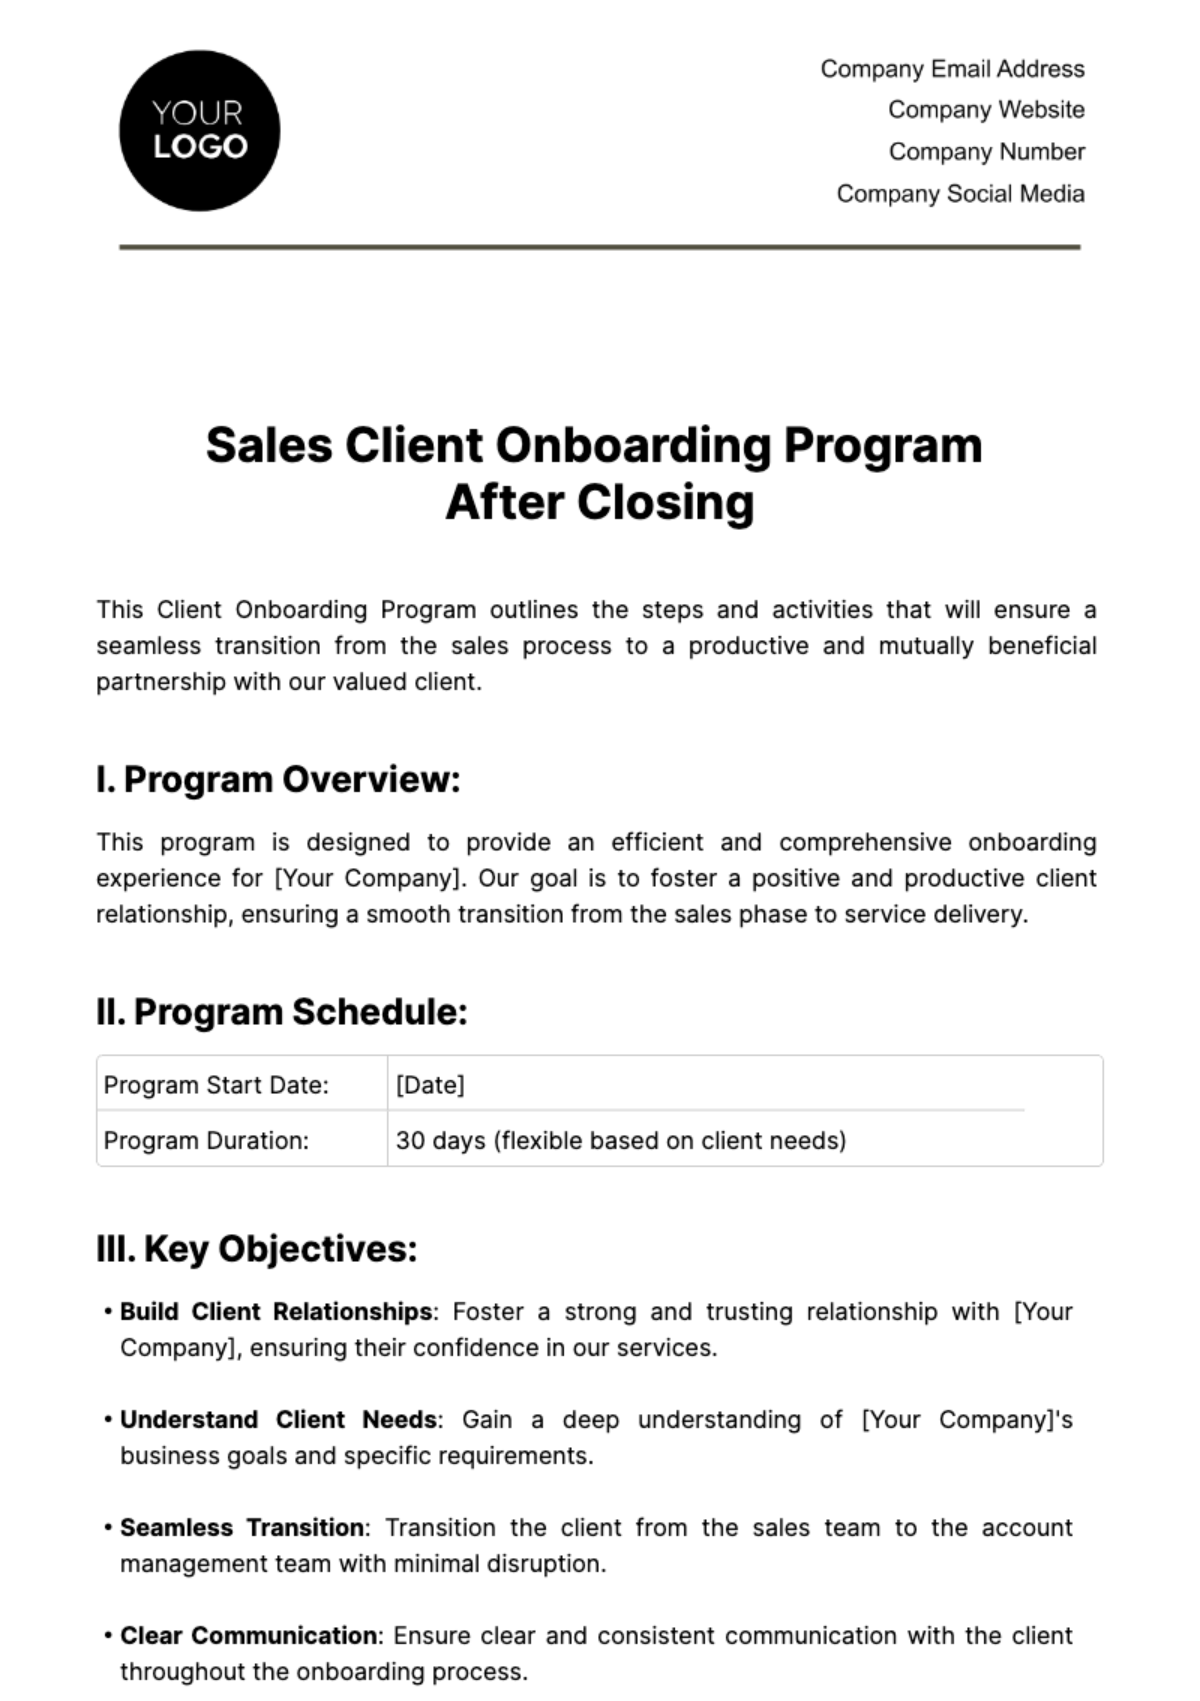 Sales Client Onboarding Program after Closing Template